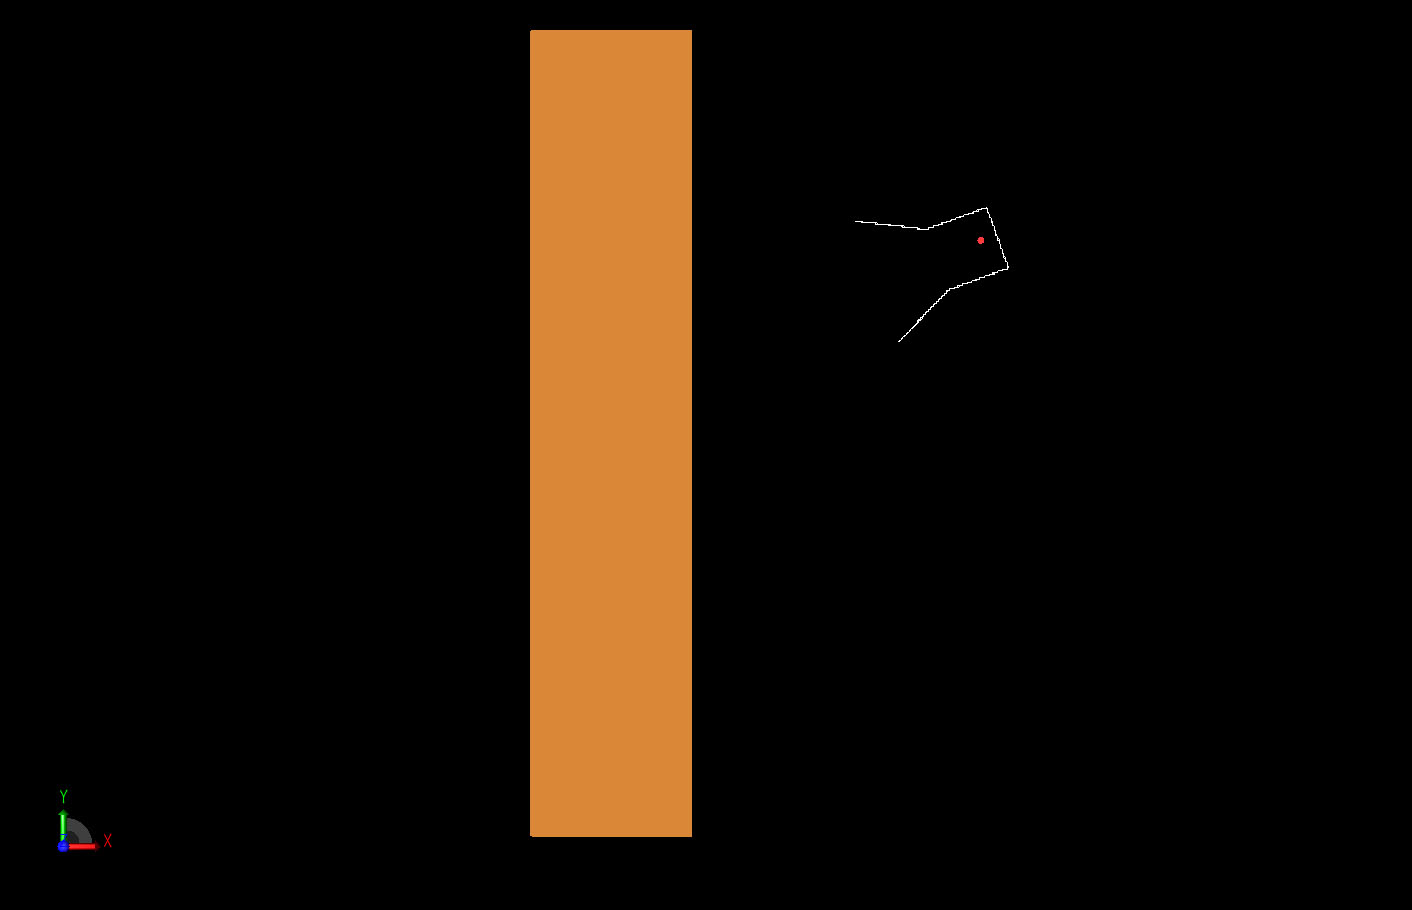 Figure 1The basic two-dimensional geometry of the material slab and the tilted horn radiator.